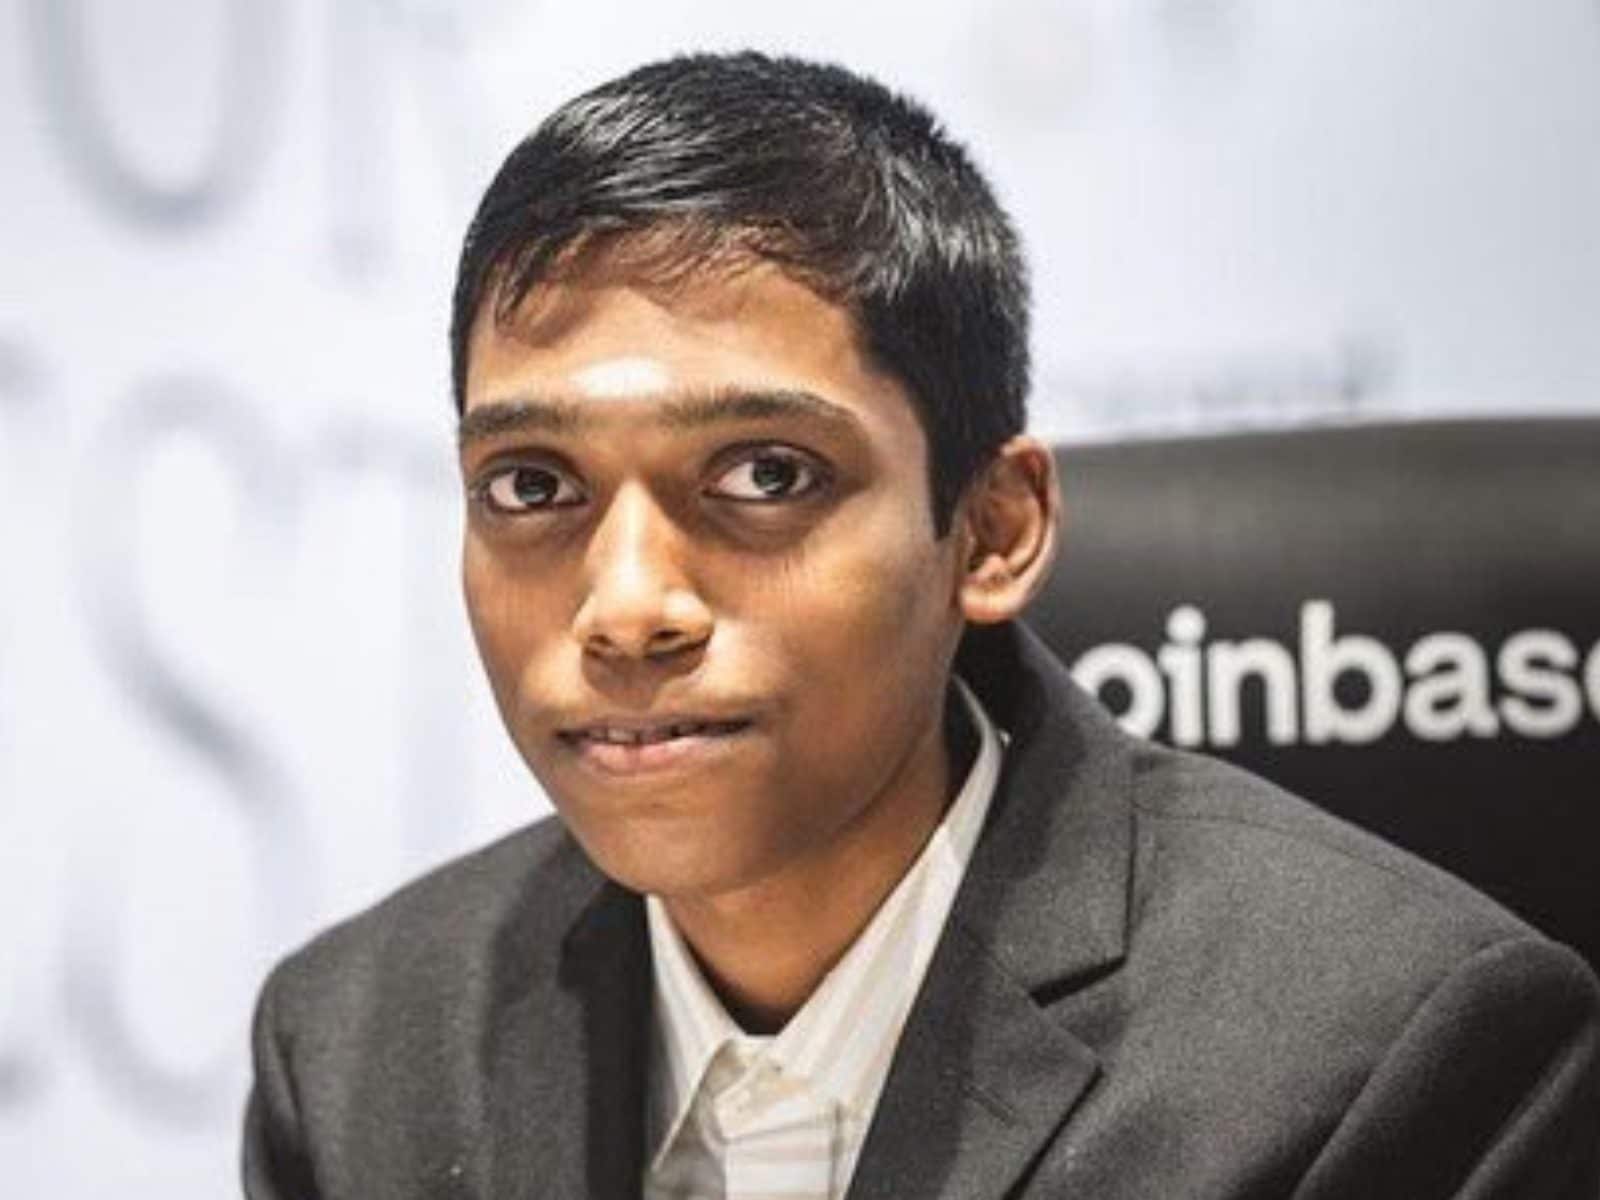 R Praggnanandhaa Wins Rs. 66 Lakhs After He Finishes As Runner-Up